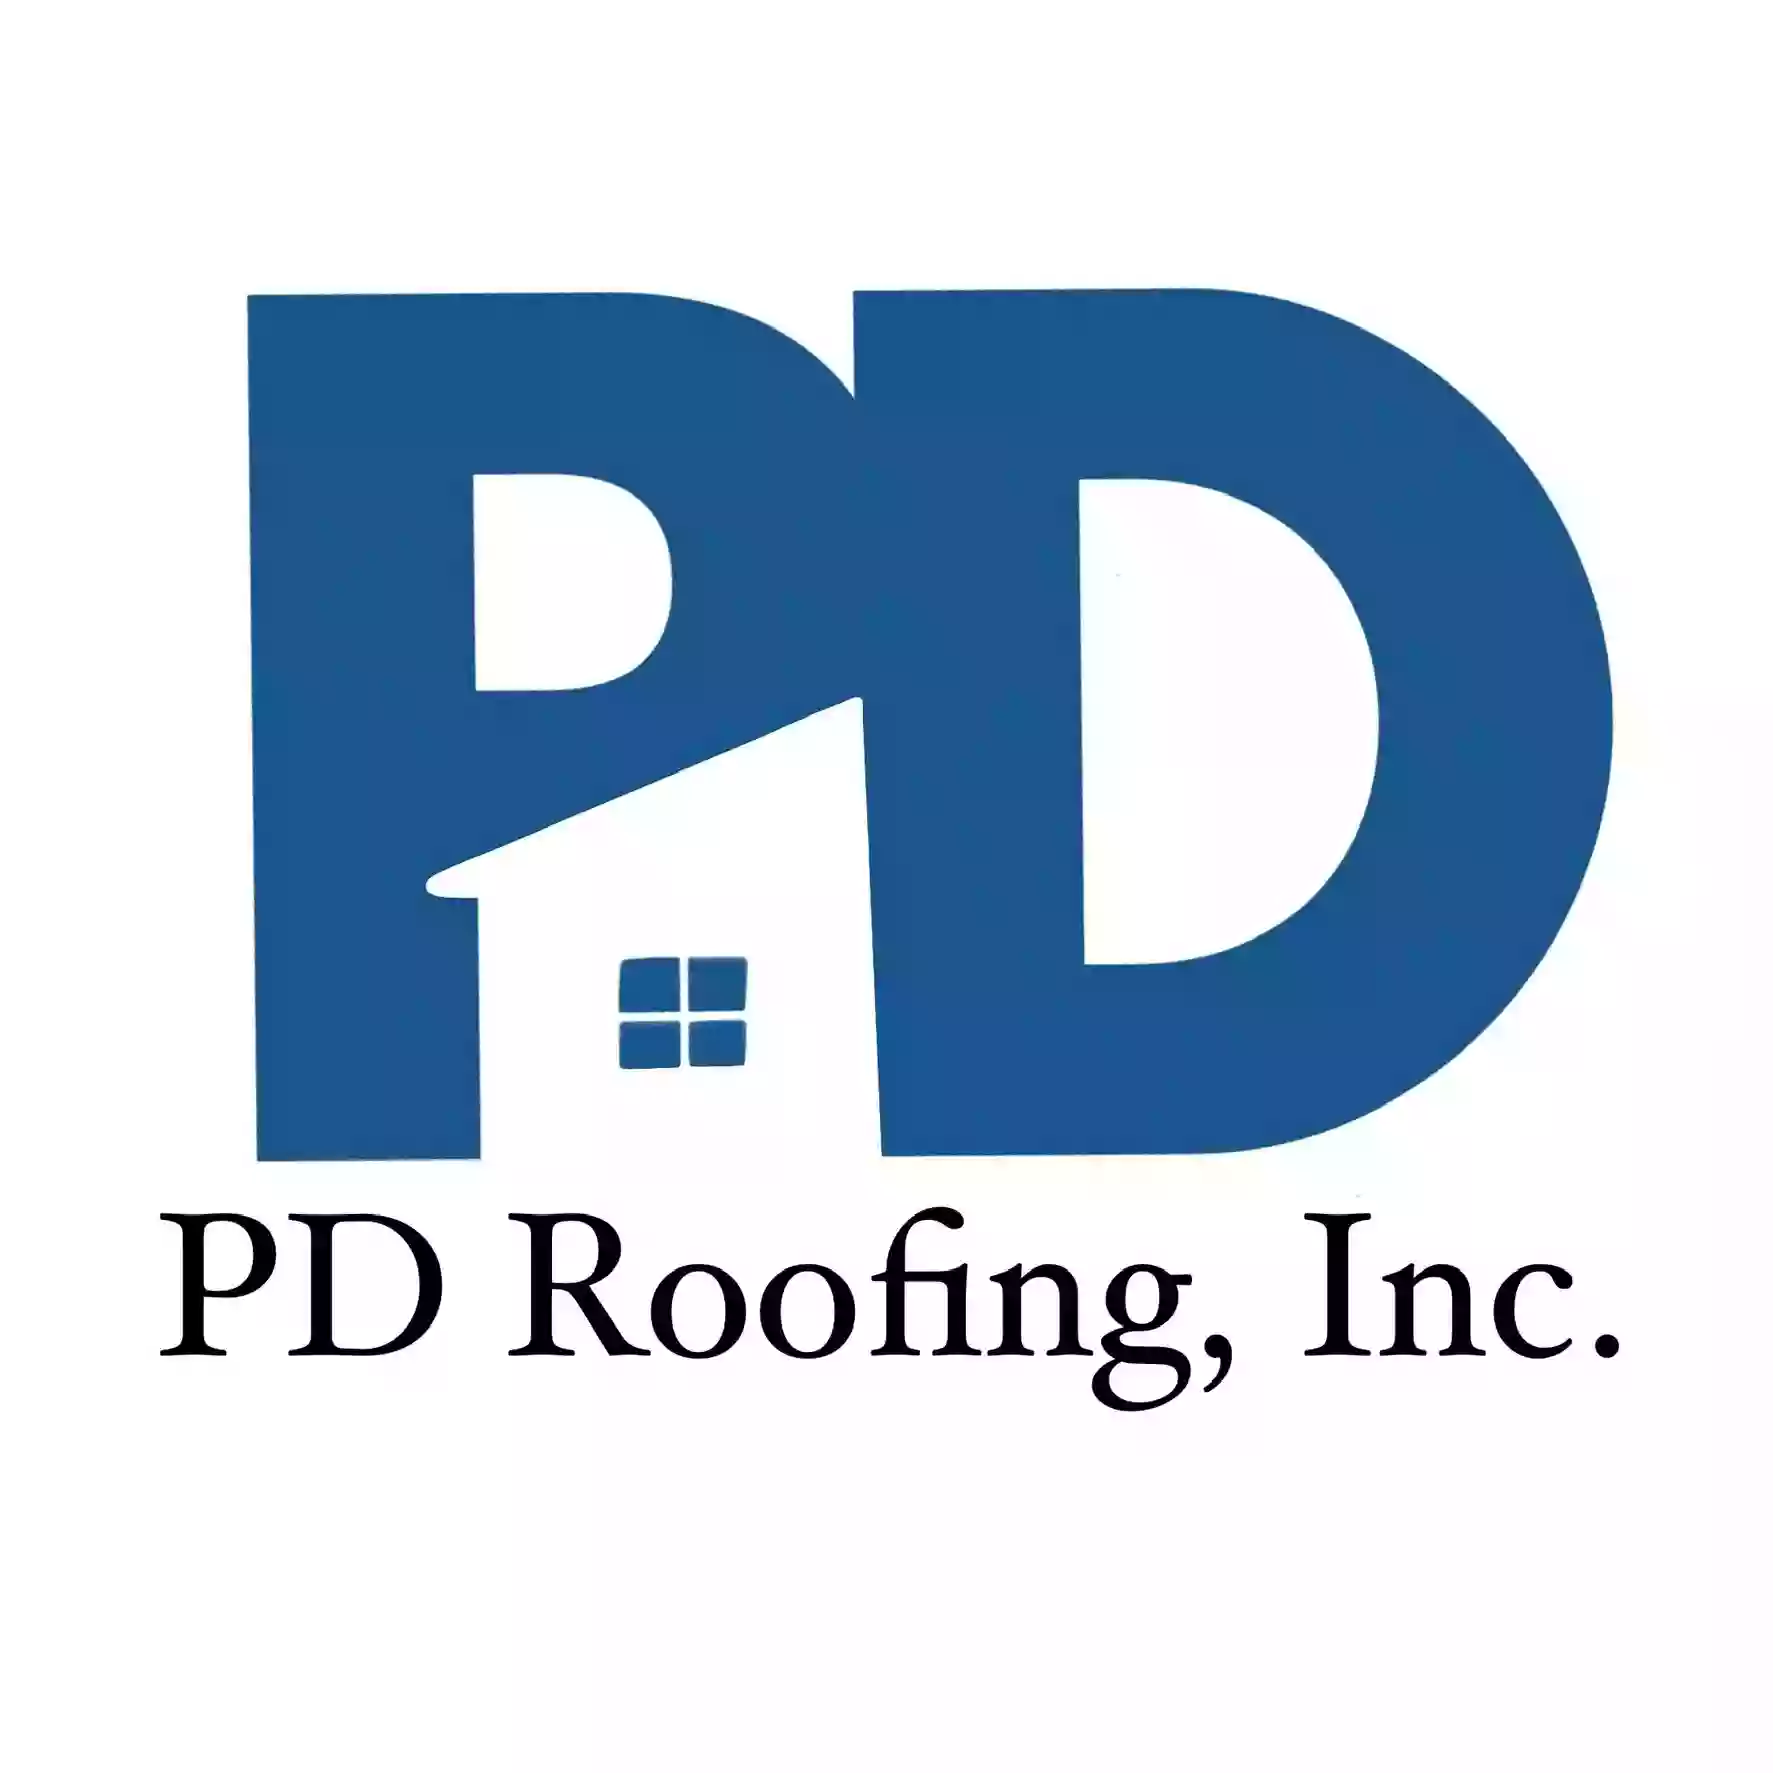 P D Roofing Inc